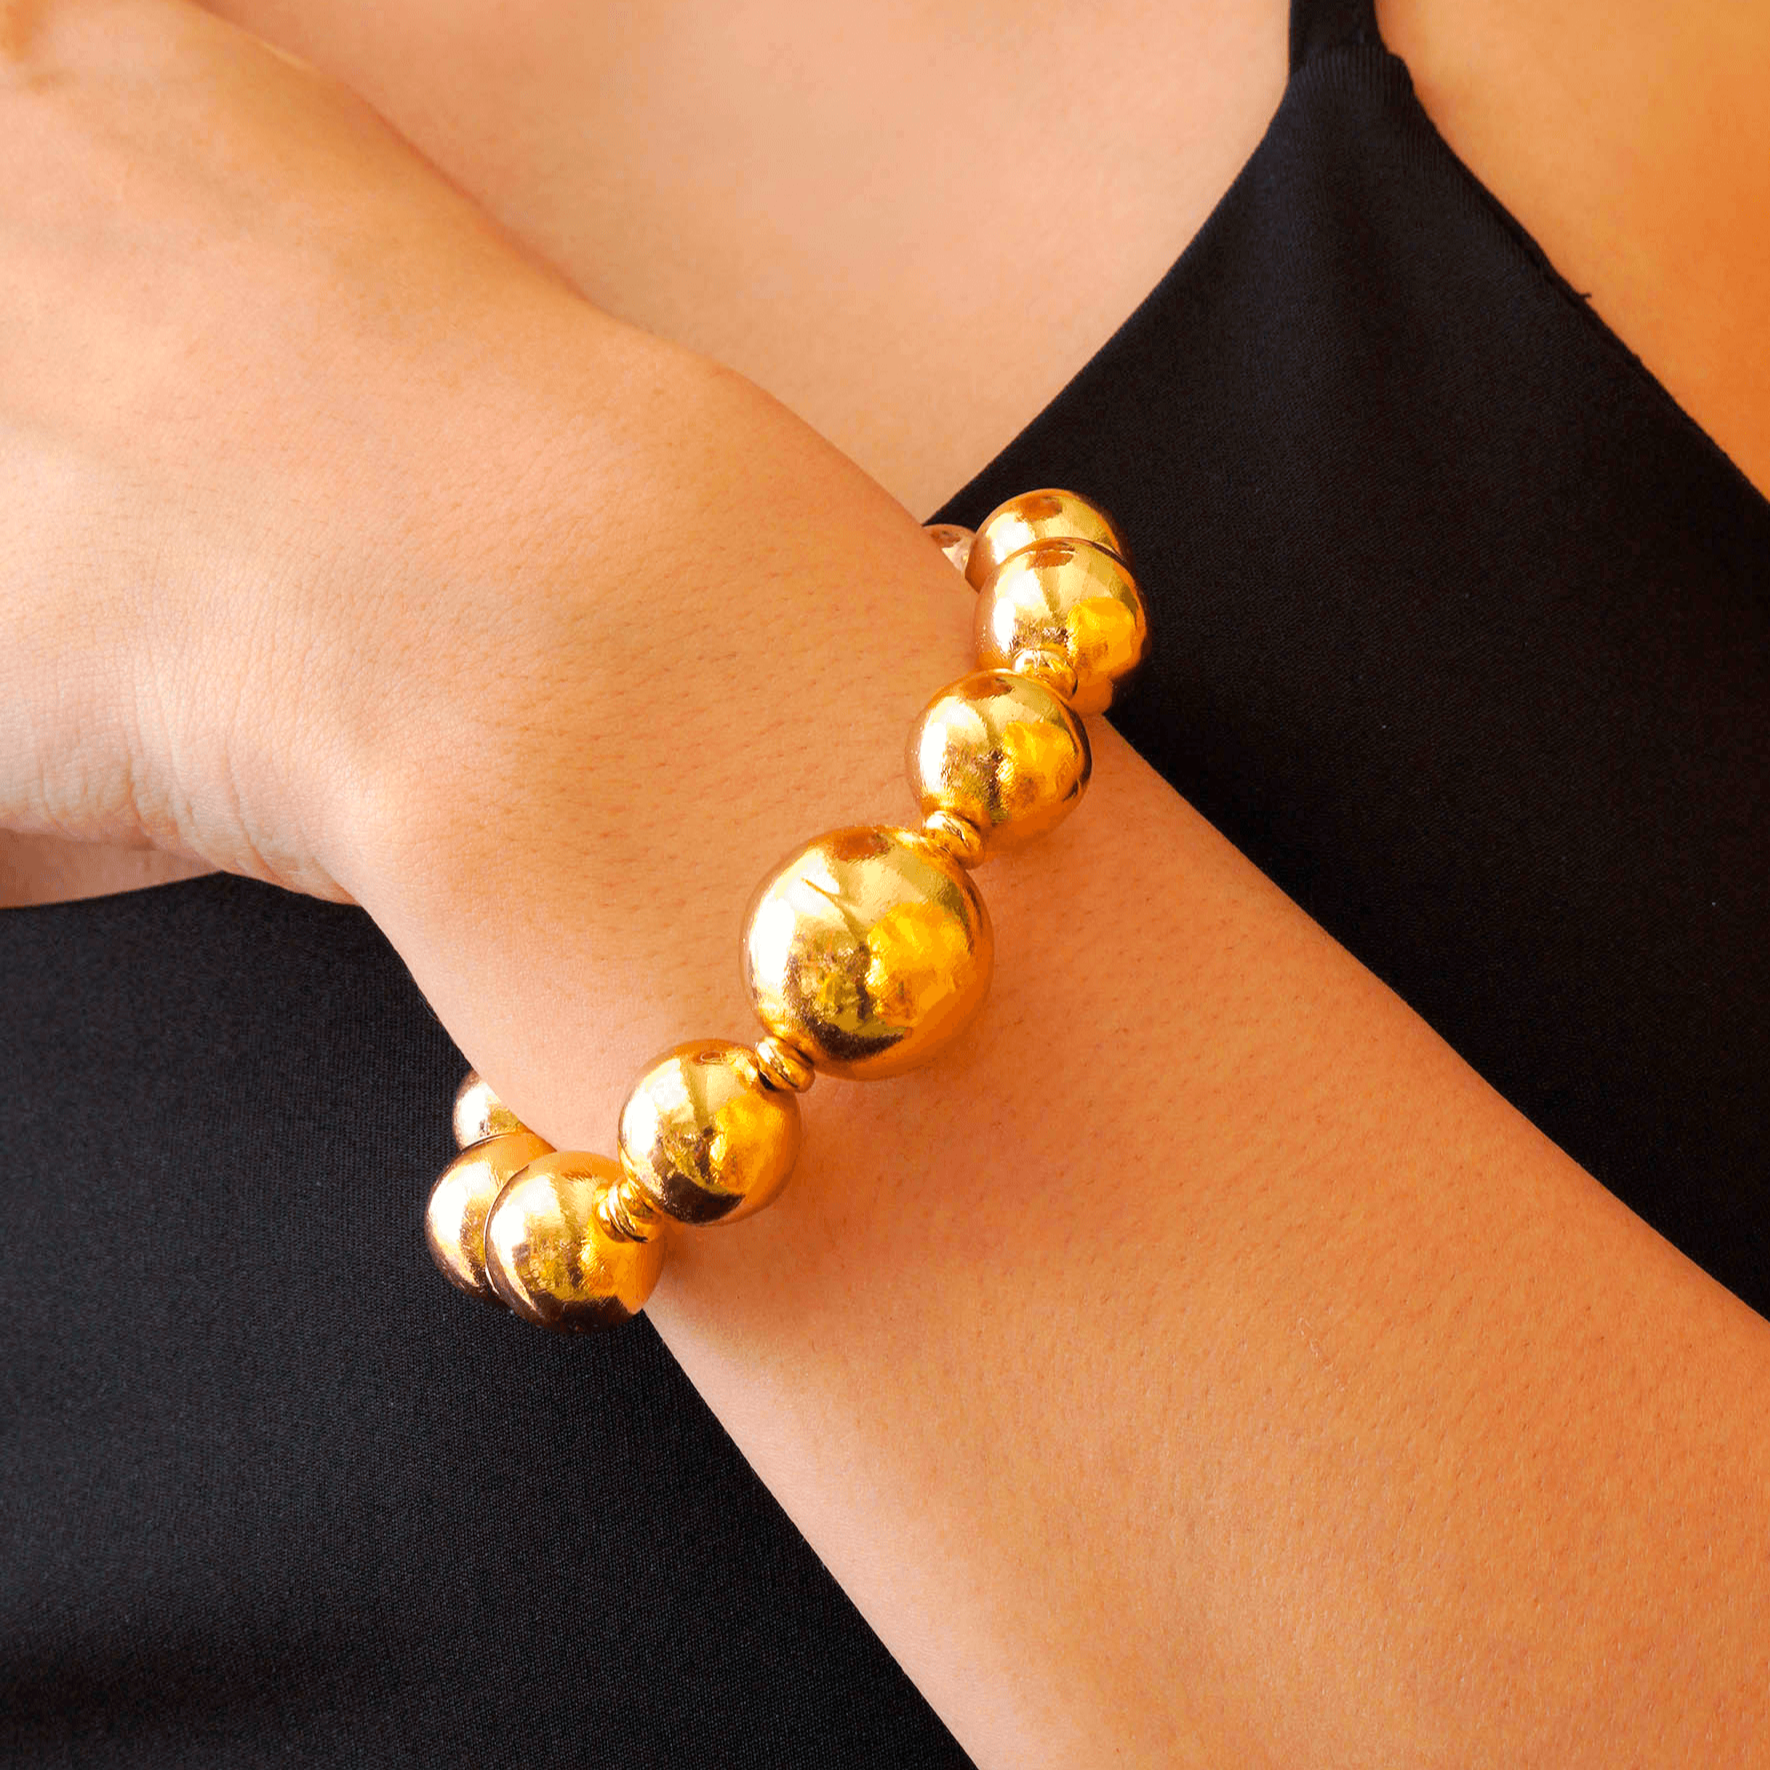 TFC Bold Beads Gold Plated Single Bracelet-Discover our stunning collection of stylish bracelets for women, featuring exquisite pearl bracelets, handcrafted beaded bracelets, and elegant gold-plated designs. Enjoy cheapest anti-tarnish fashion jewellery and long-lasting brilliance only at The Fun Company.